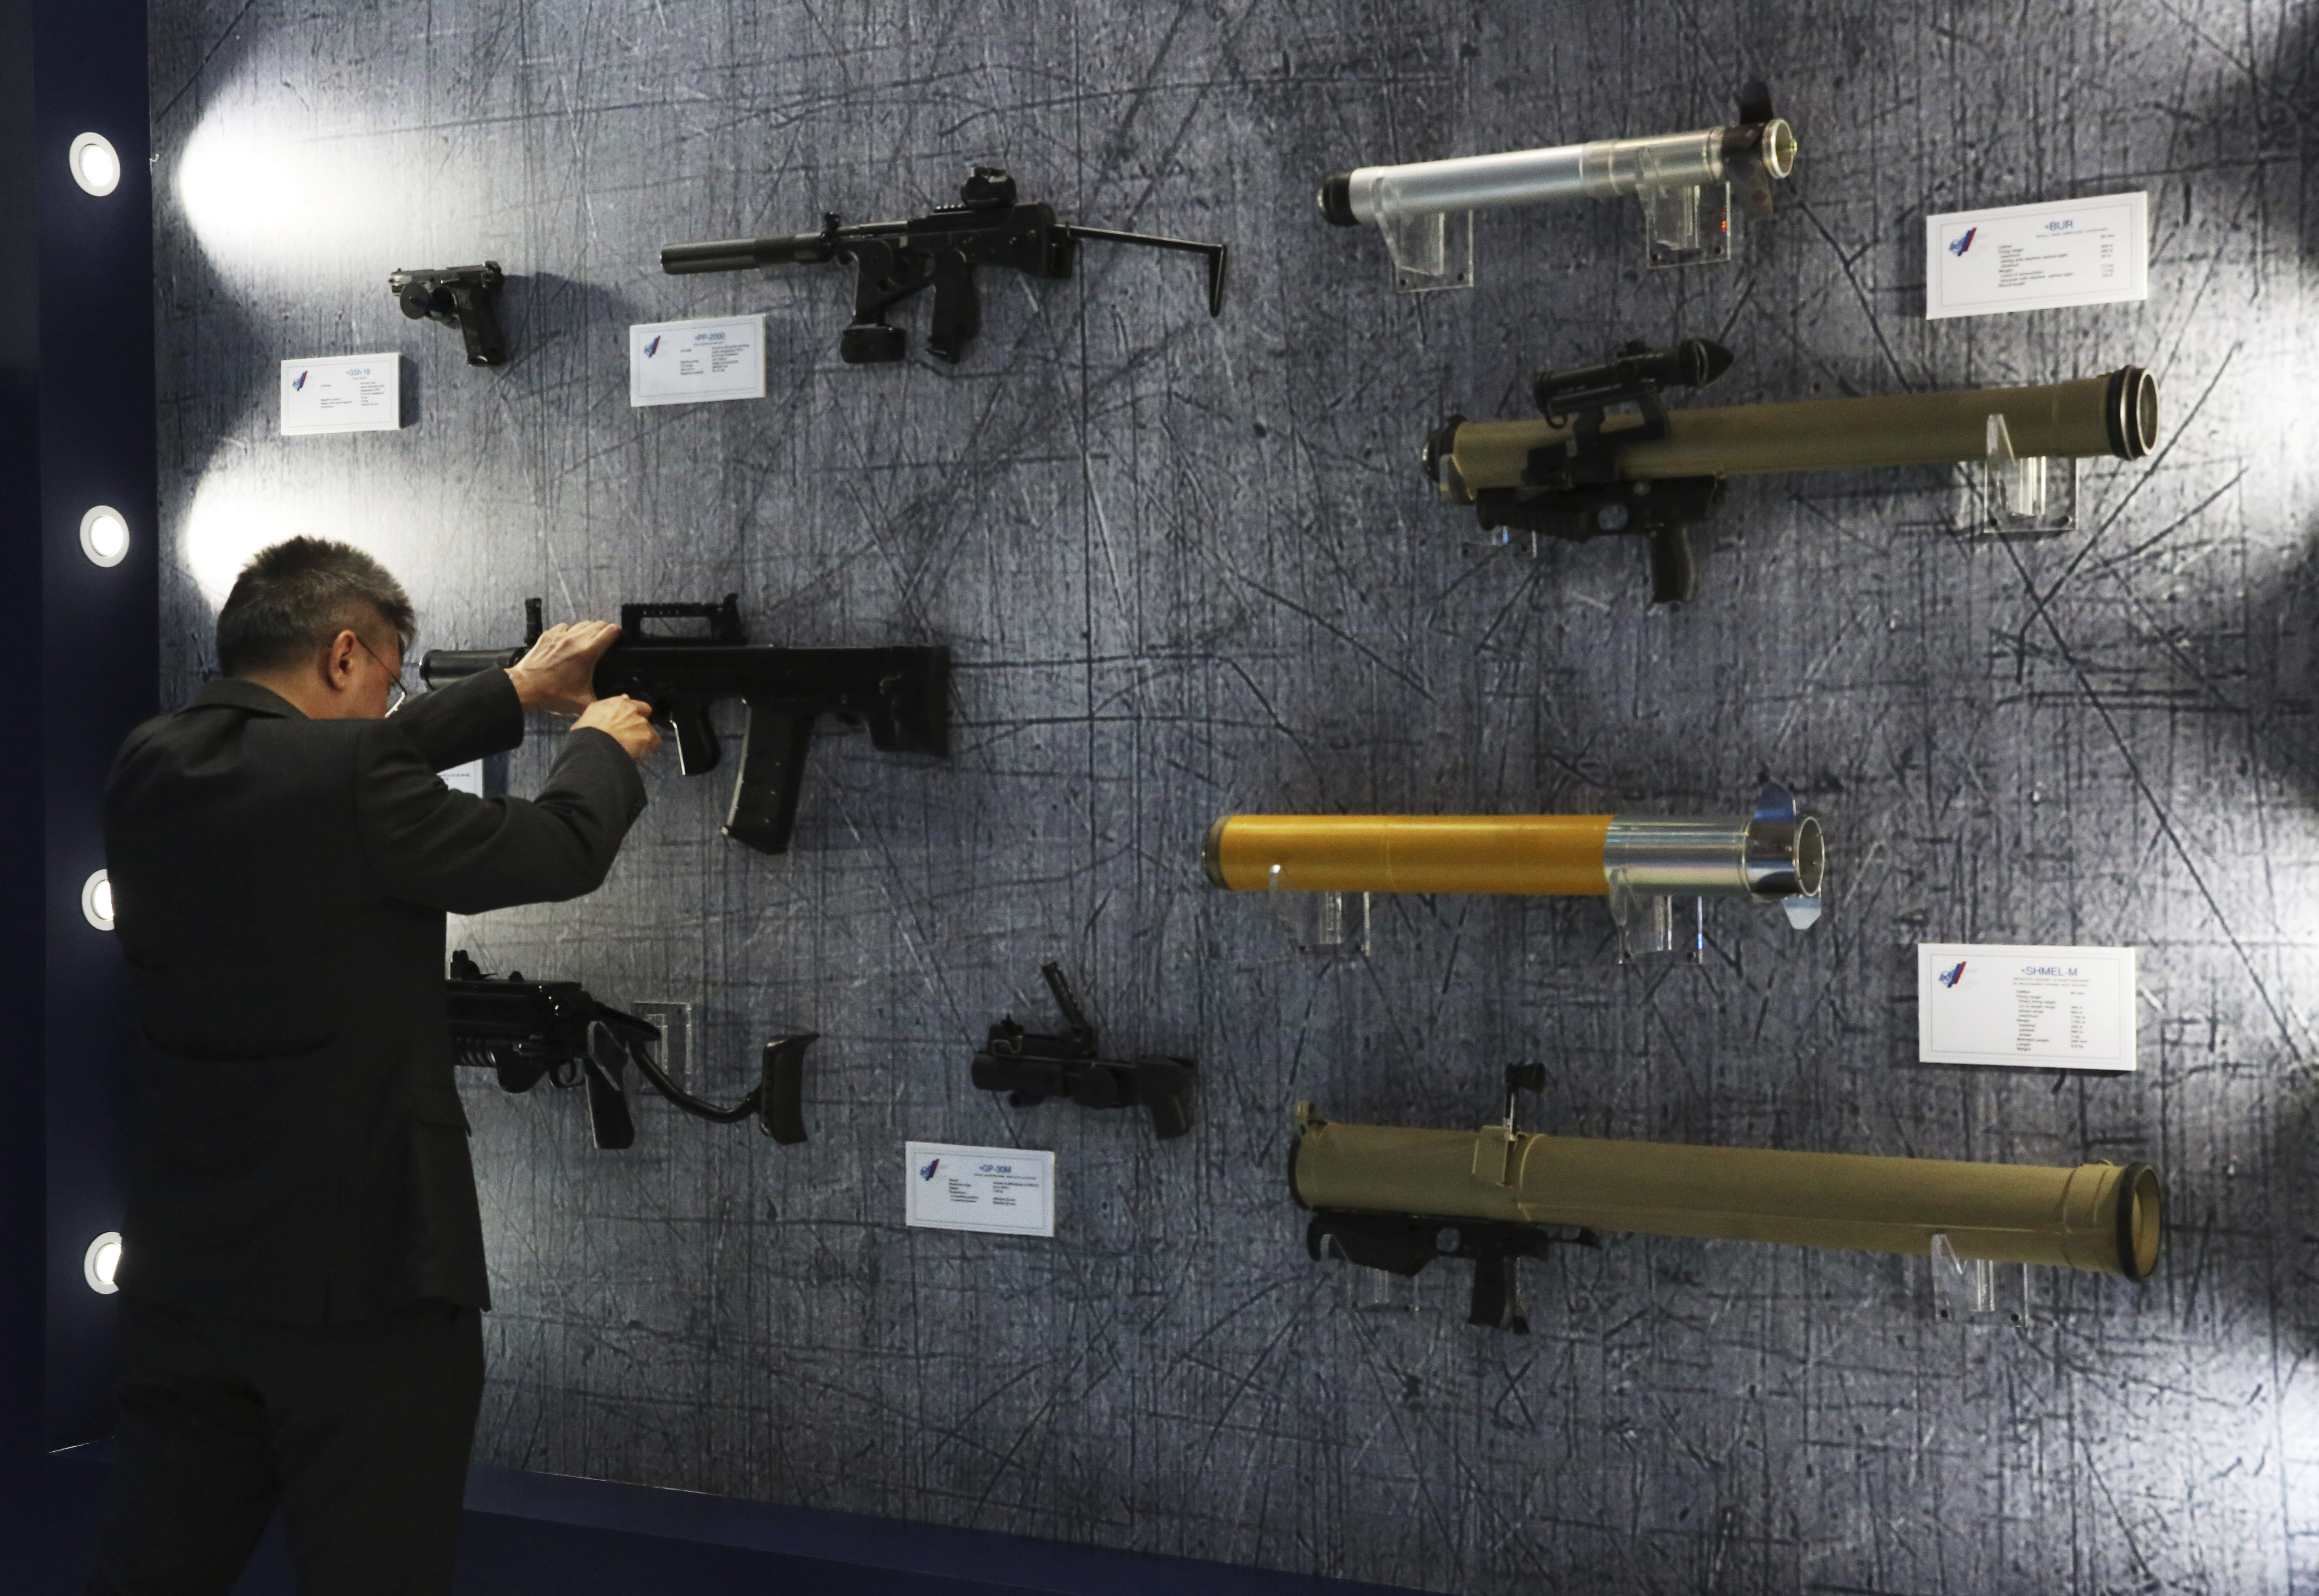 A passerby struggles to put an assault rifle back on the wall at a display at the International Defense Exhibition and Conference in Abu Dhabi, United Arab Emirates, Sunday, Feb. 17, 2019. The biennial arms show in Abu Dhabi comes as the United Arab Emirates faces increasing criticism for its role in the yearlong war in Yemen. (AP Photo/Jon Gambrell)